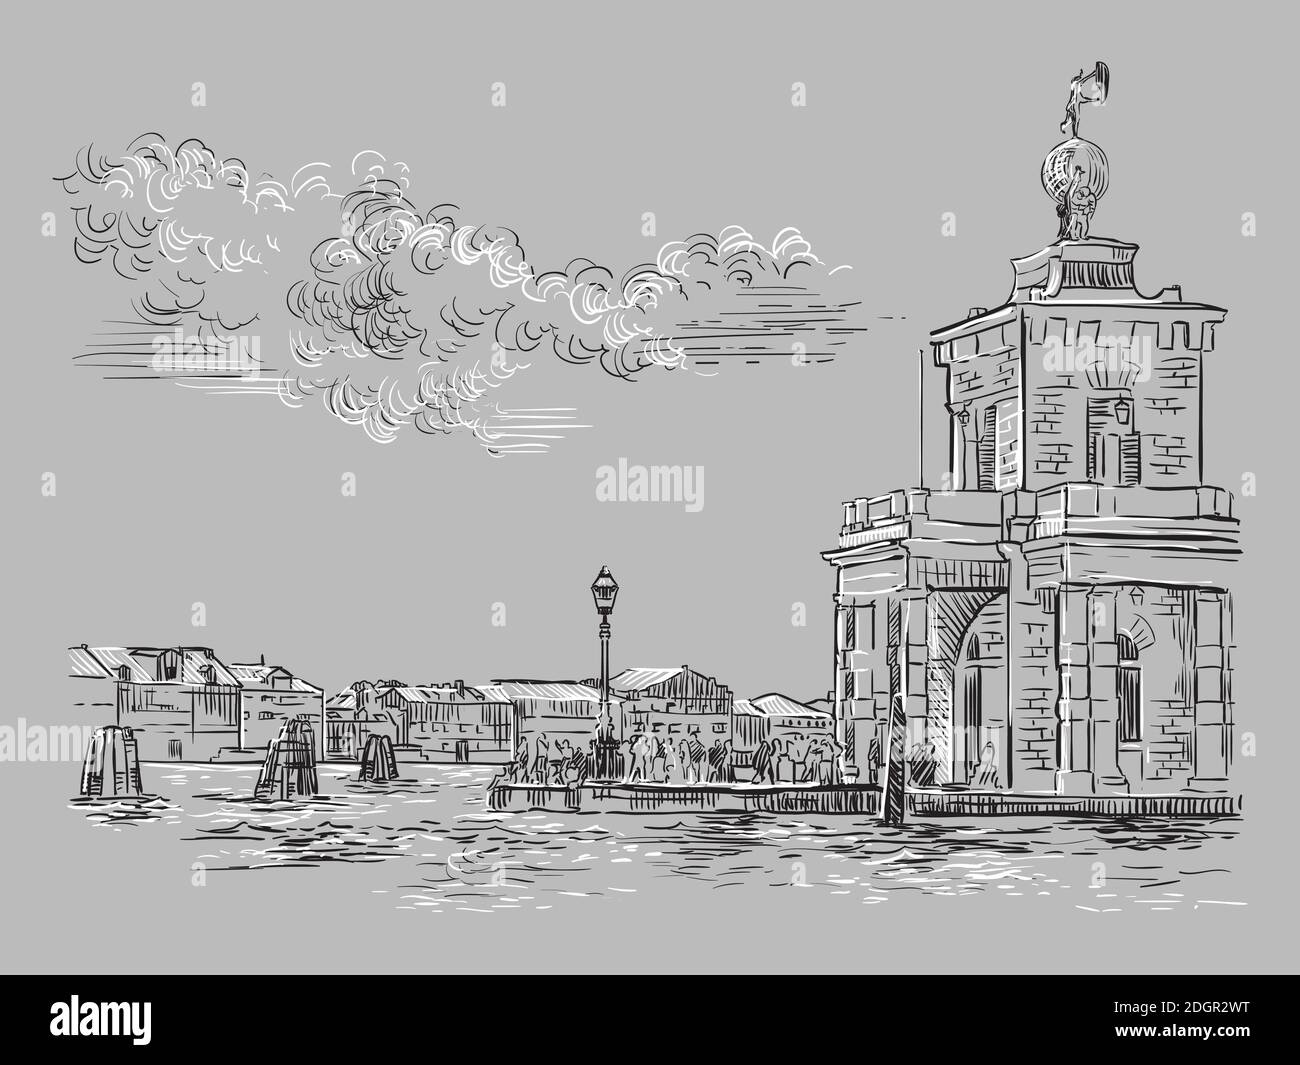 Vector hand drawing sketch illustration of Della Dogane in Venice. Venice skyline hand drawn sketch in monochrome colors isolated on gray background. Stock Vector